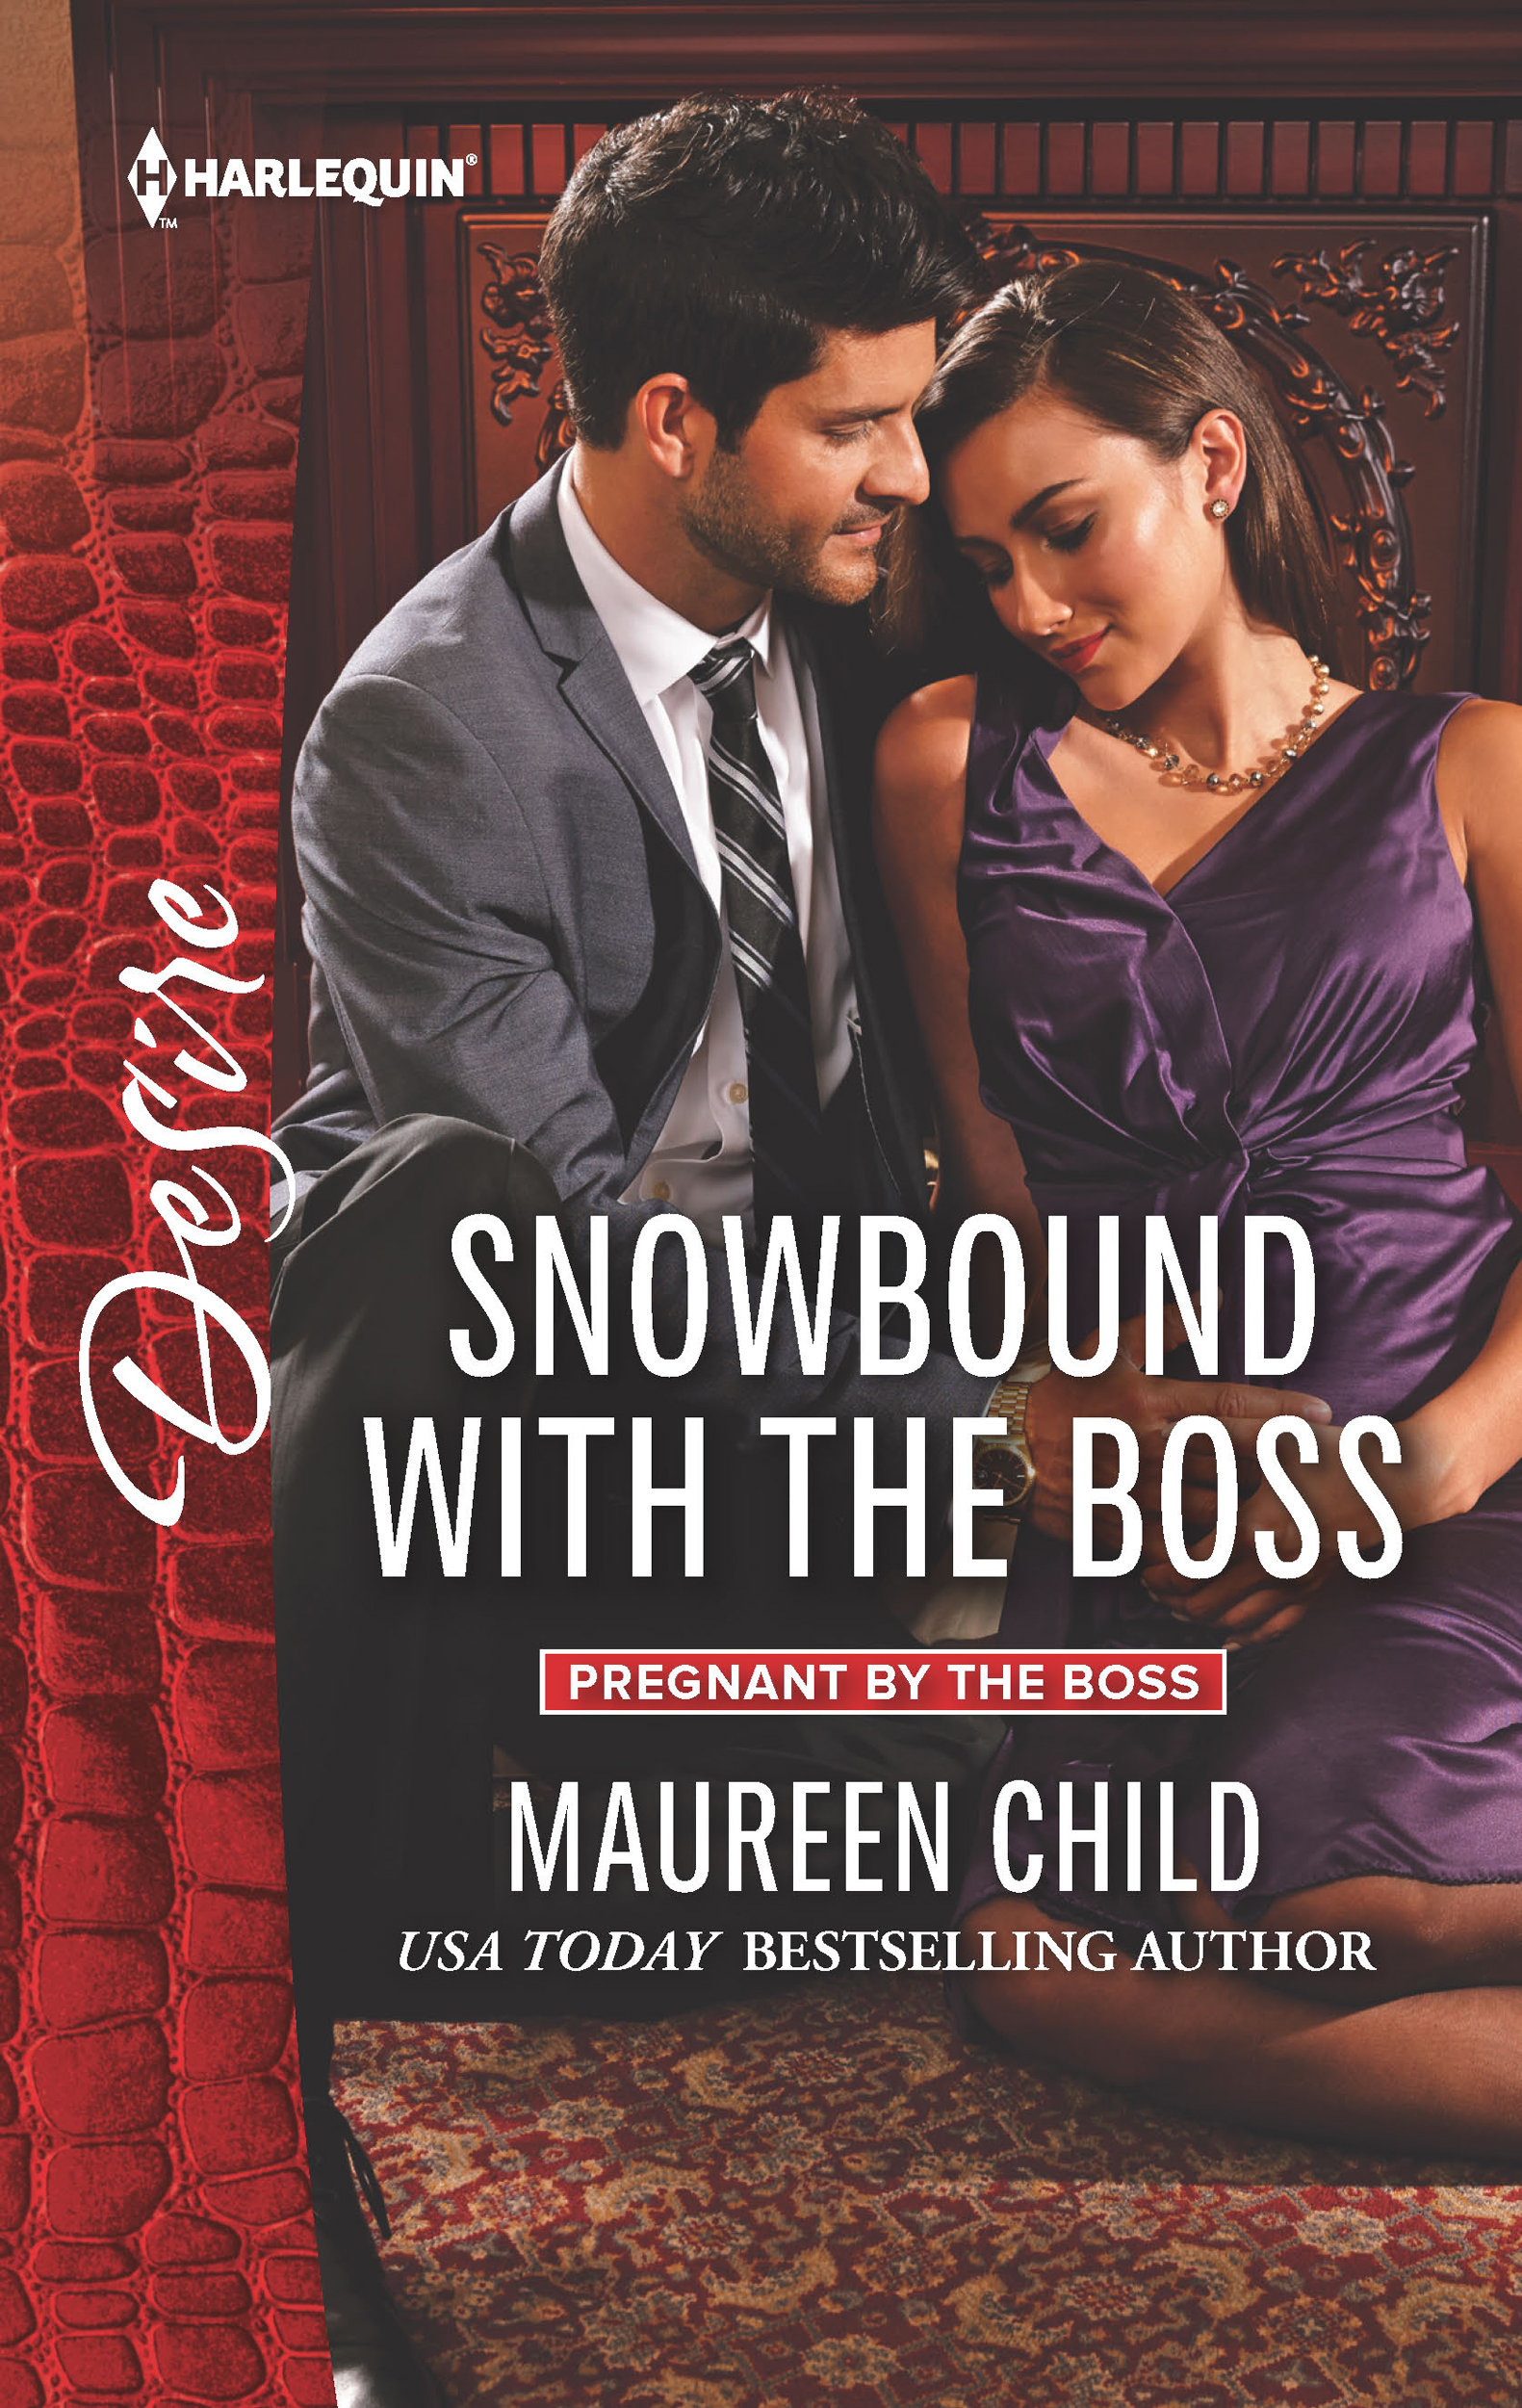 Snowbound with the Boss (2015) by Maureen Child